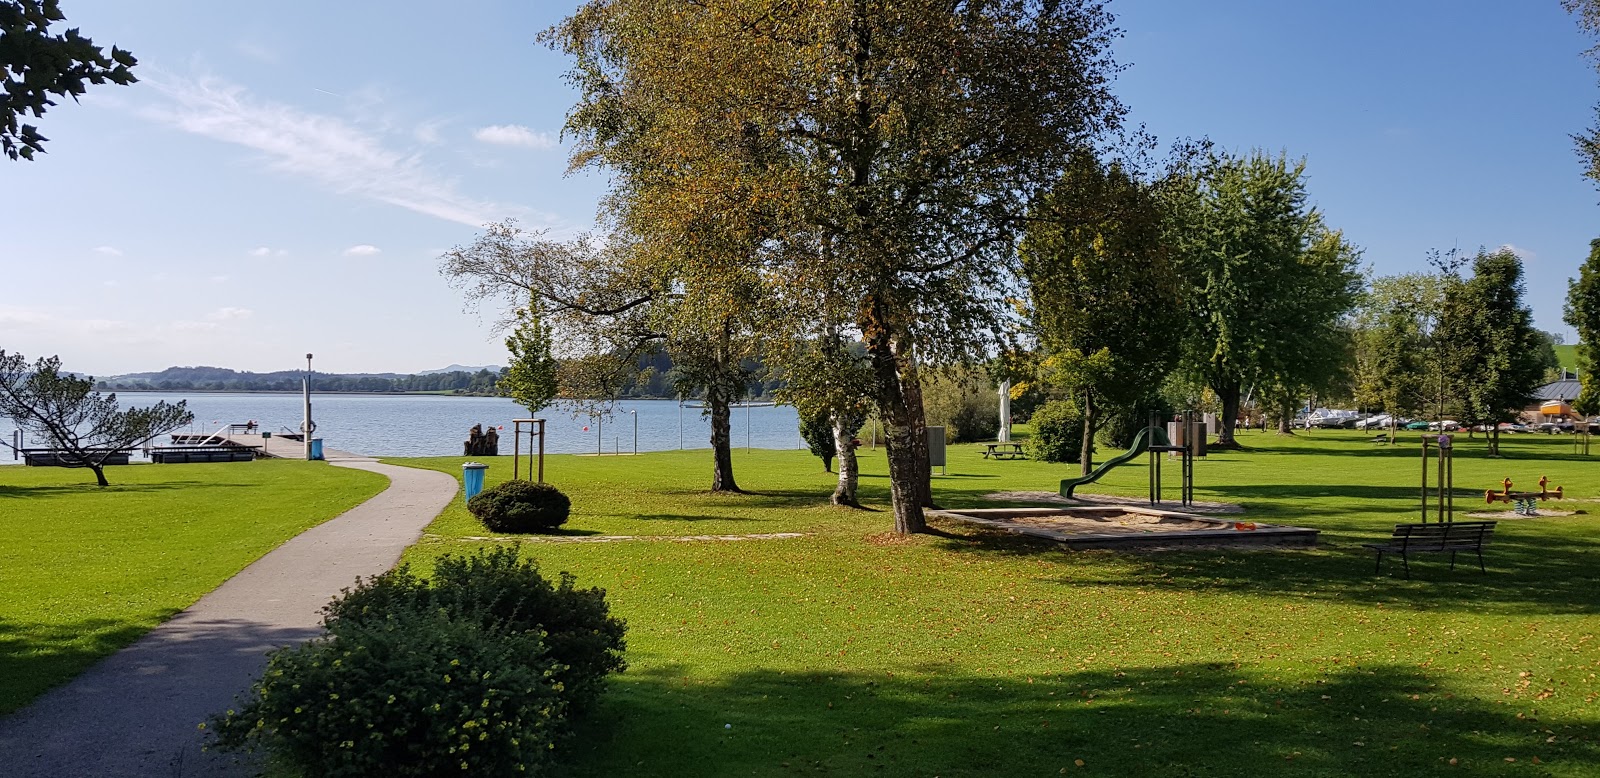 Photo of Wallersee Strand with grass surface